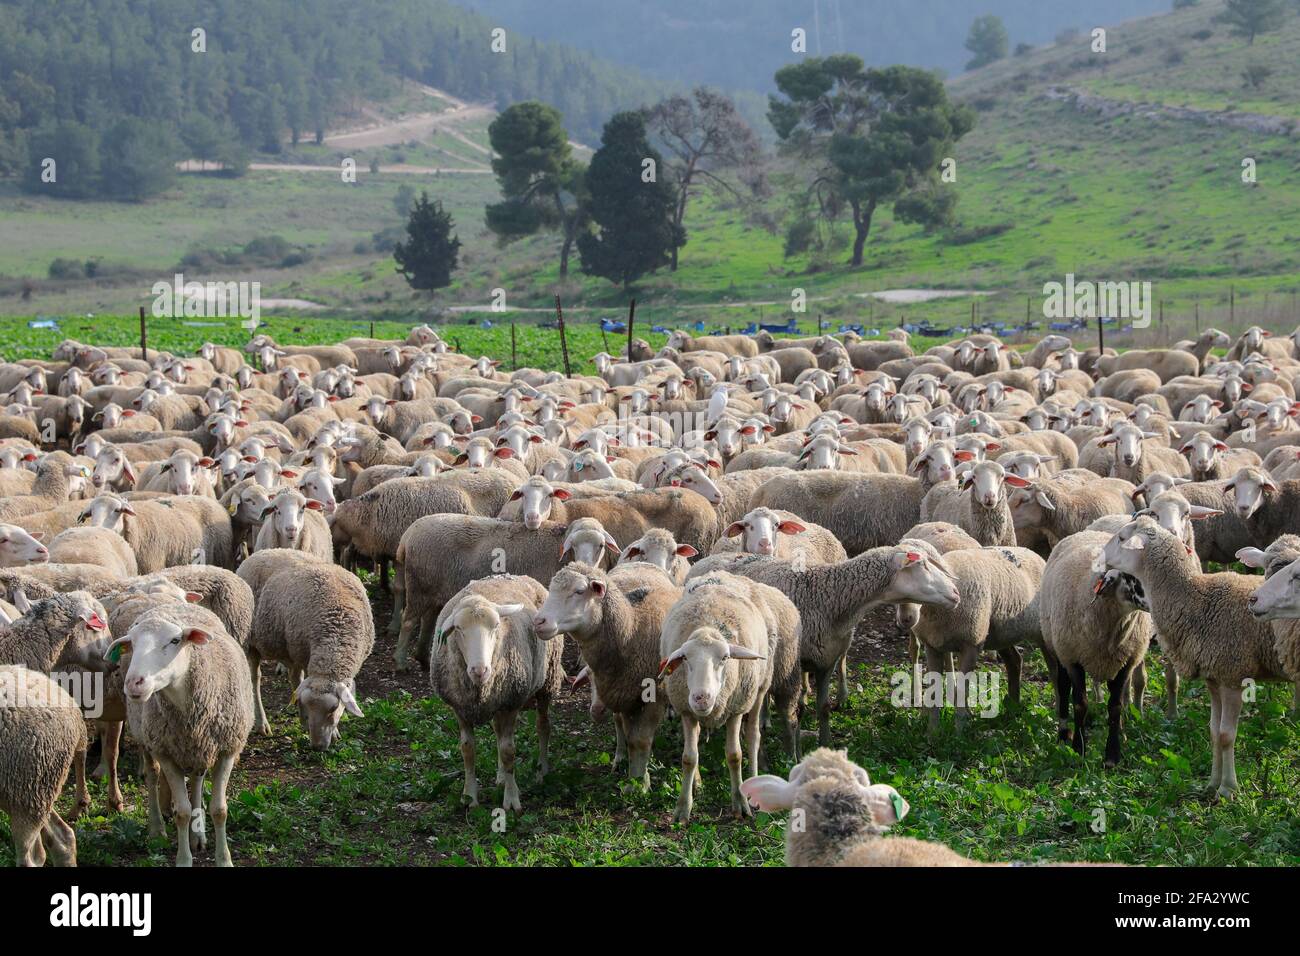 Herd of white sheep grazing in a Green landscape. Stock Photo